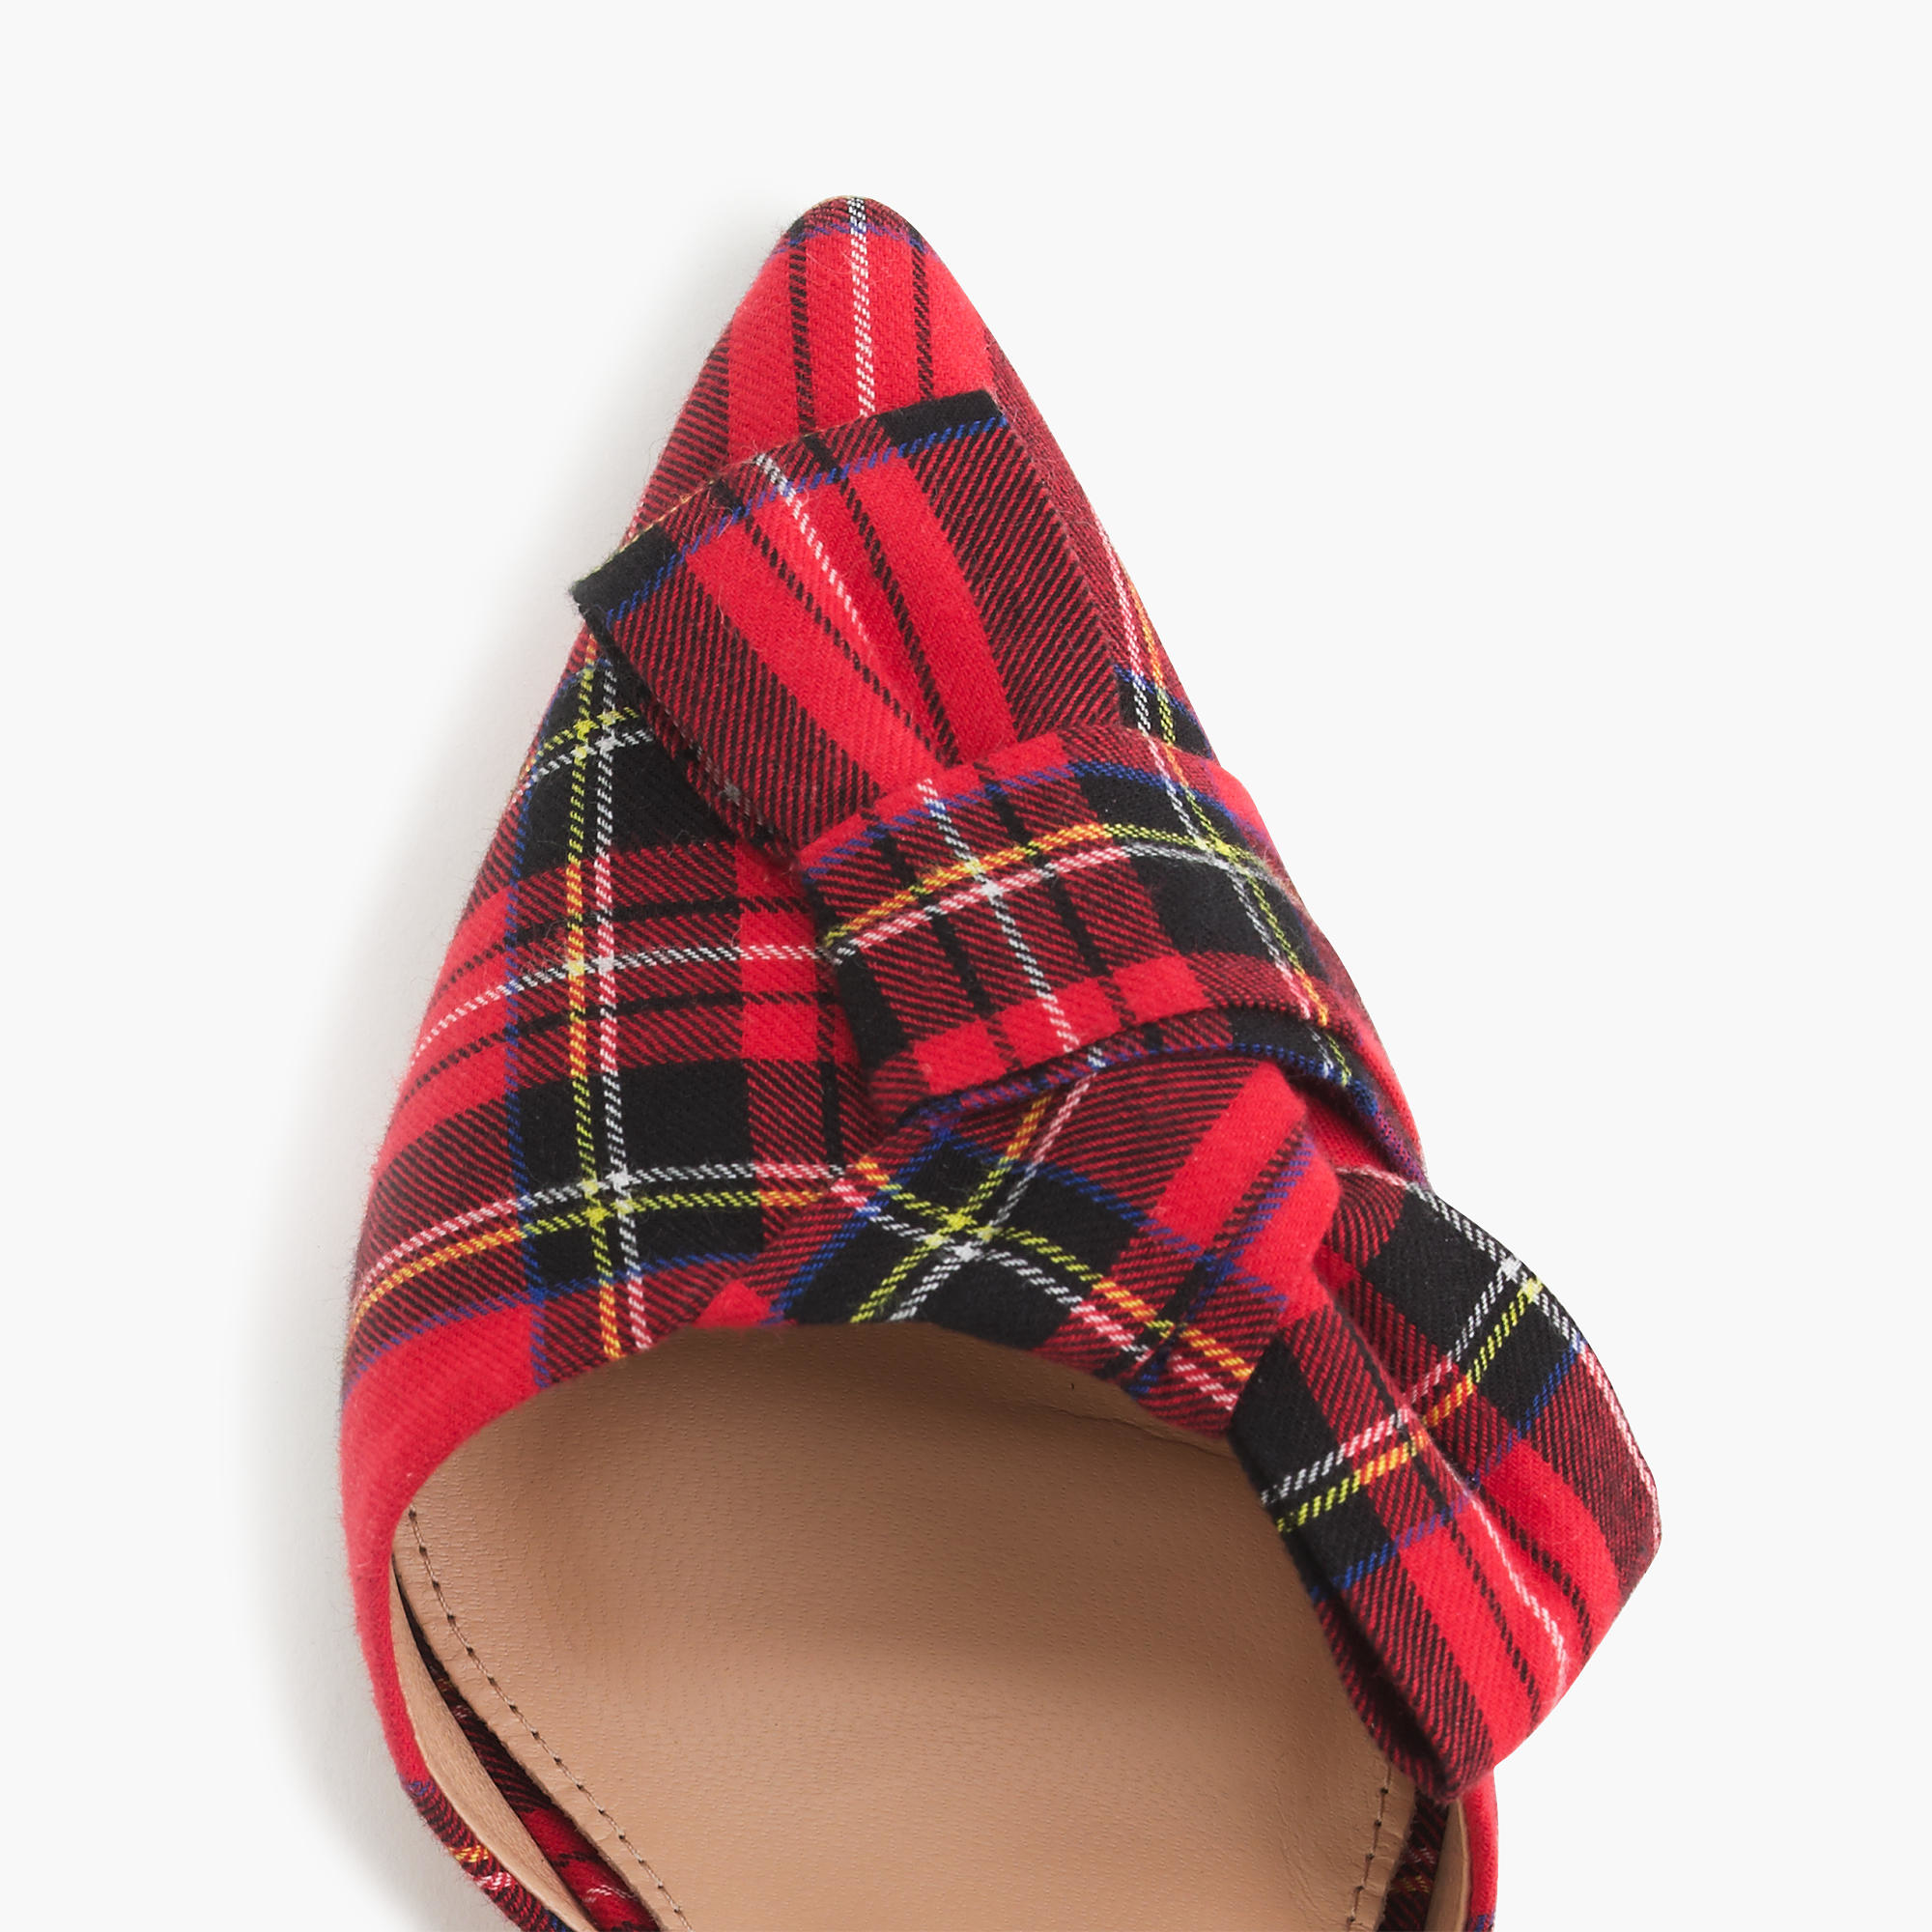 J.Crew Elsie Plaid D'orsay Pumps With Obi Bow in Red | Lyst